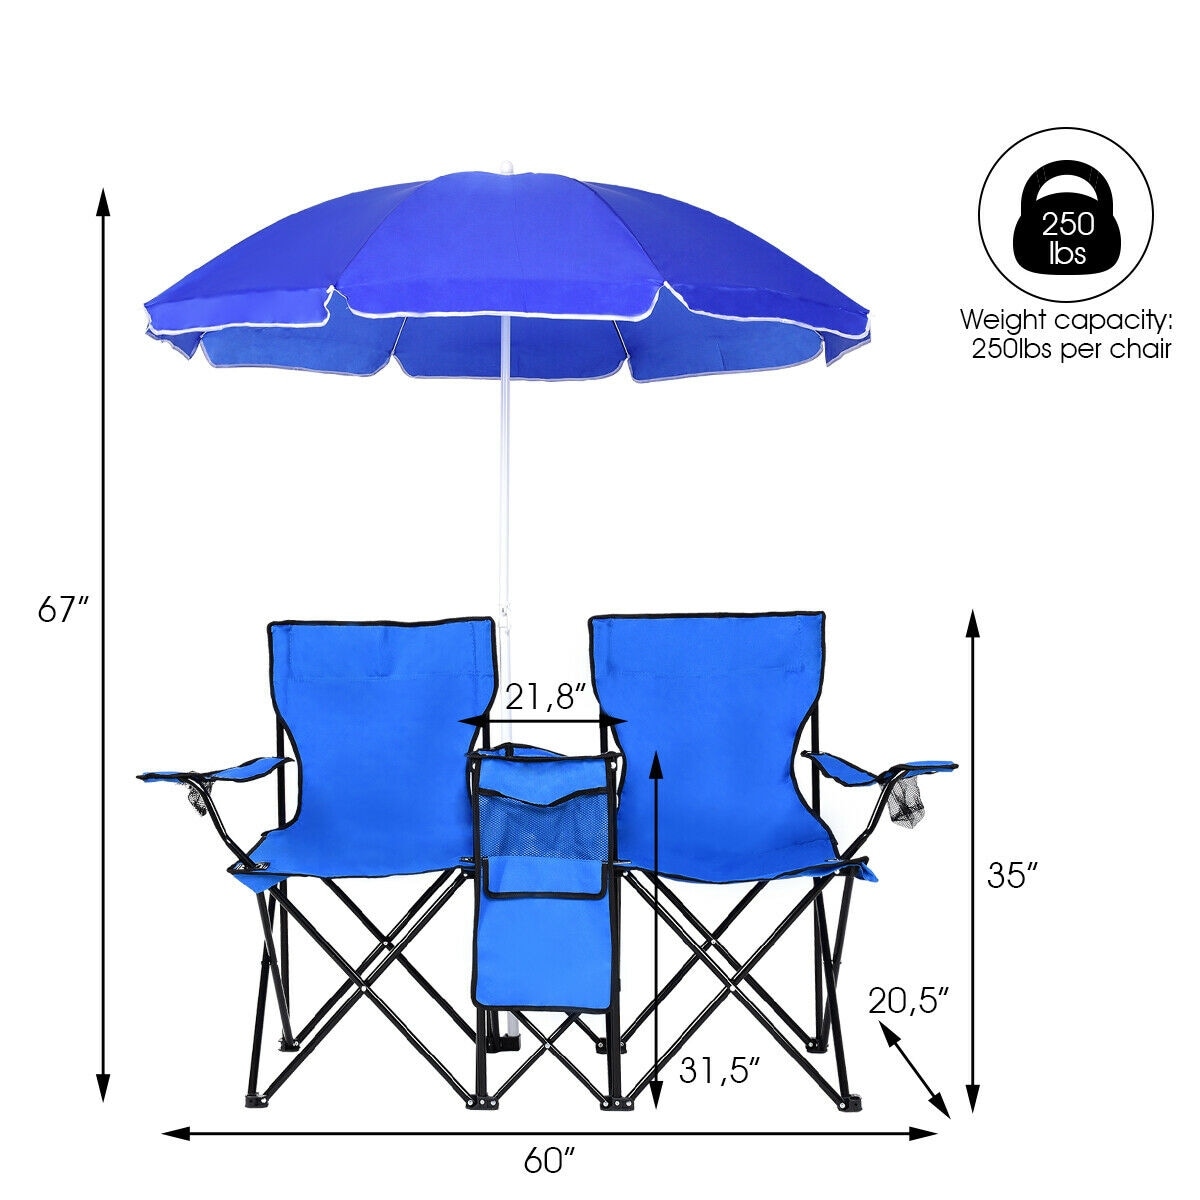 foldable chair with umbrella